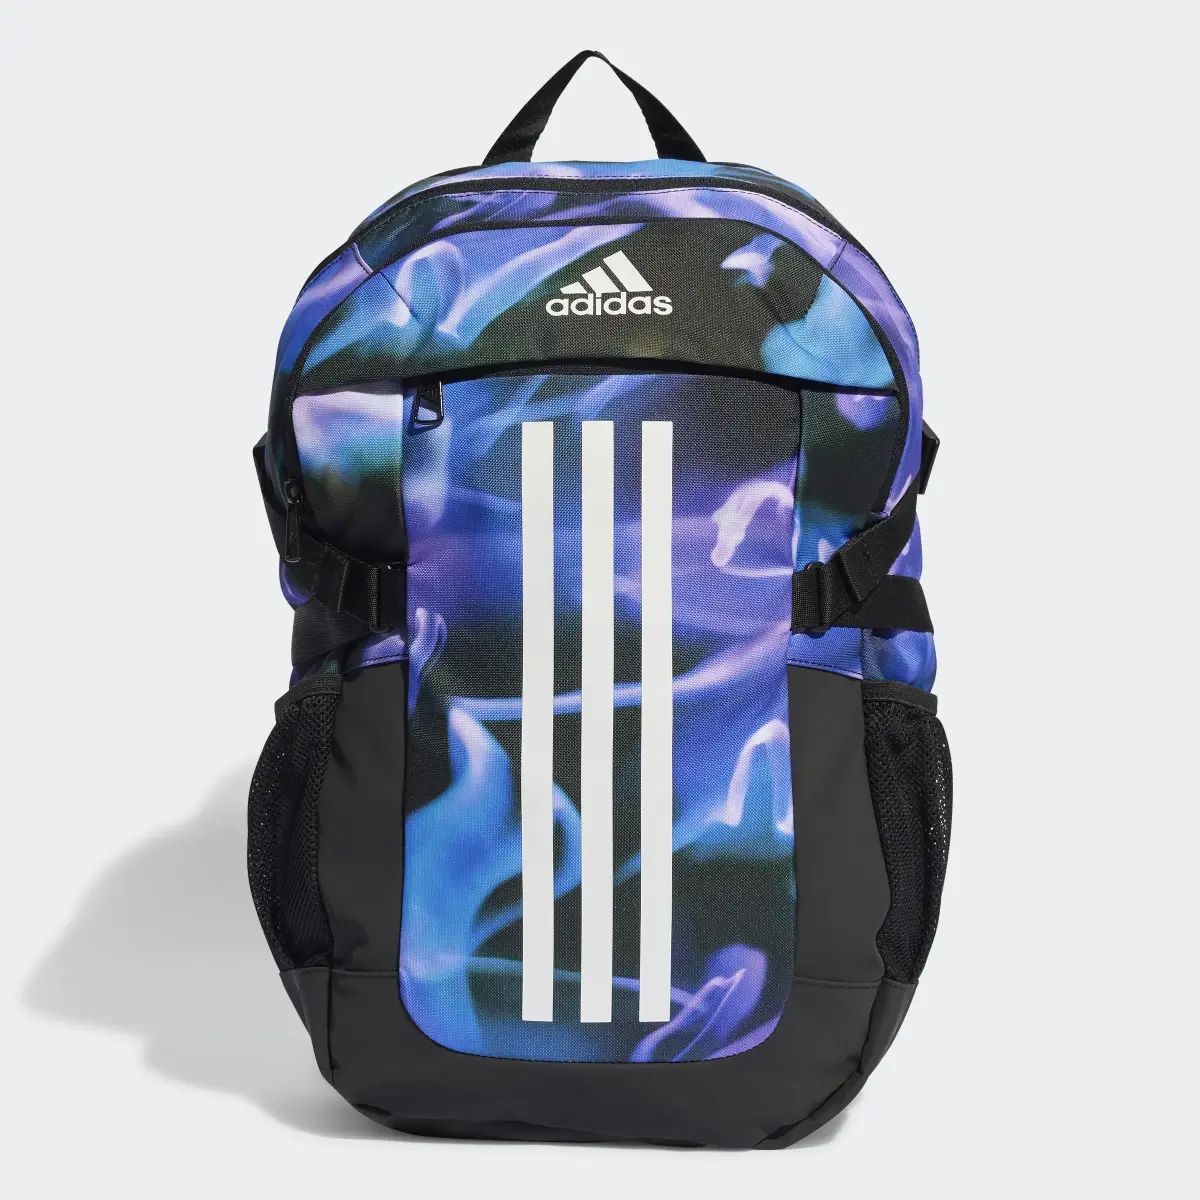 Adidas Power VI Graphic Backpack. 2